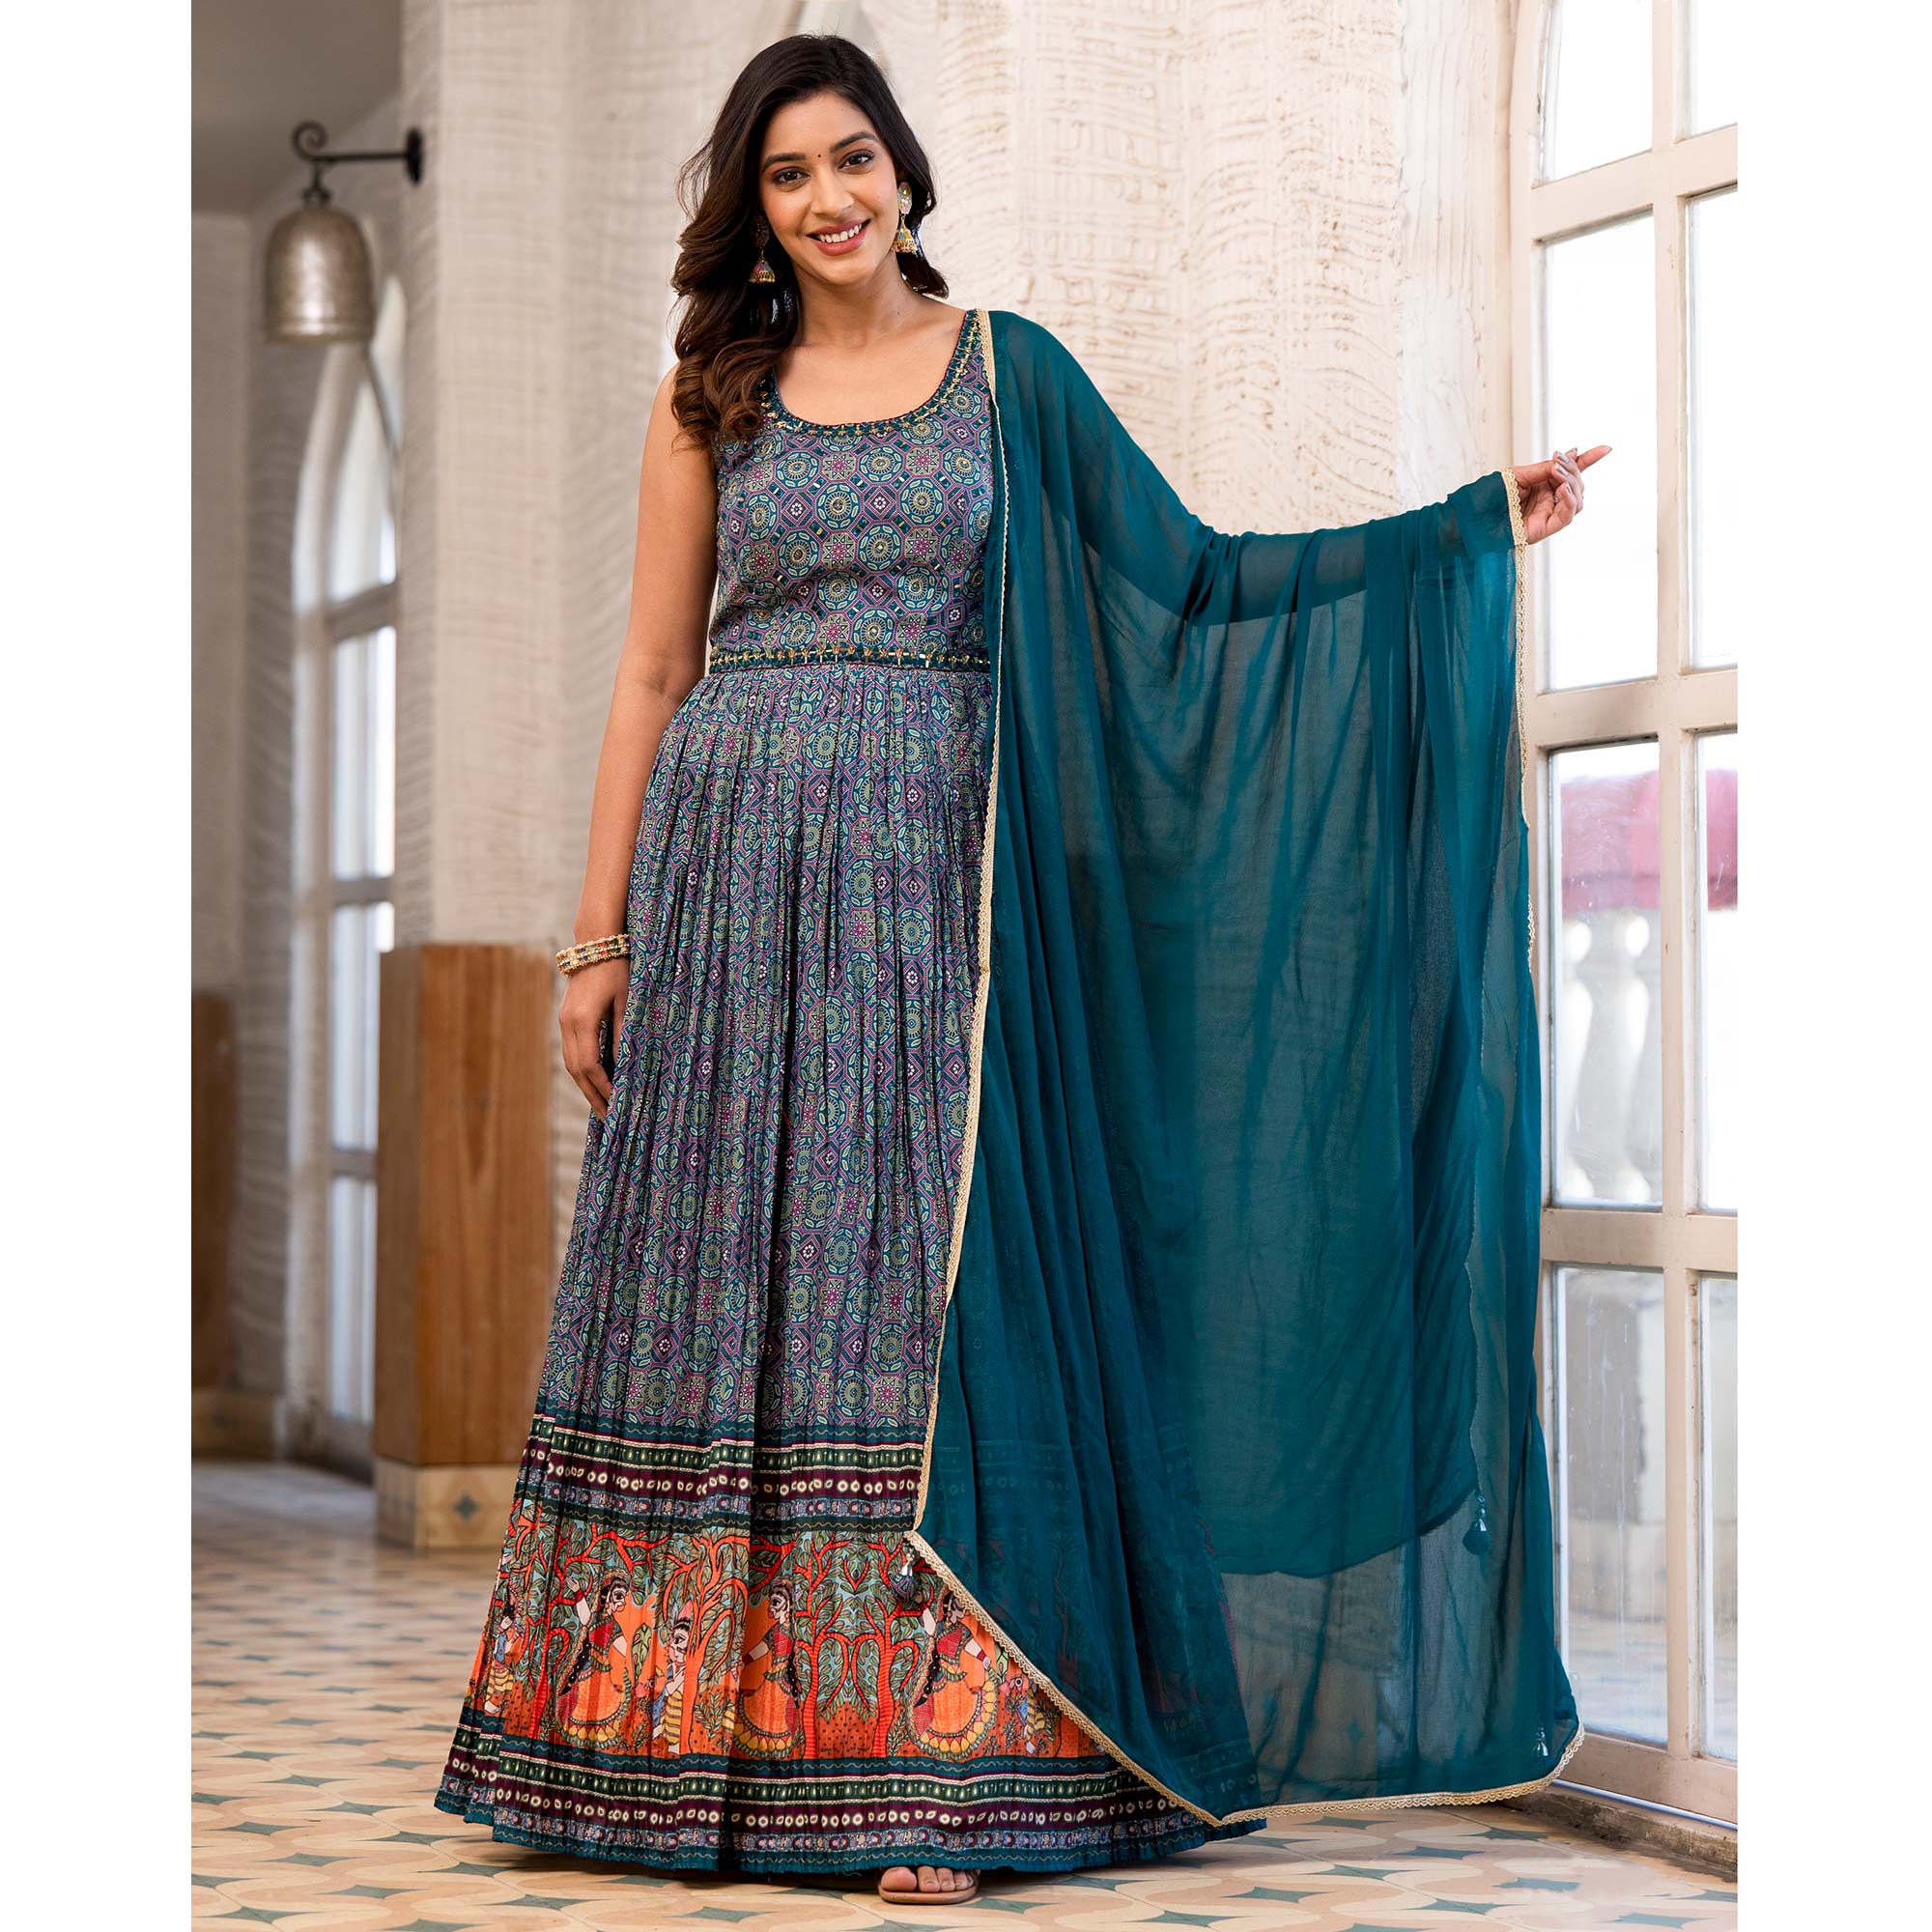 Morpich Blue Printed Dola Silk Anarkali Style Gown With Mirror Work